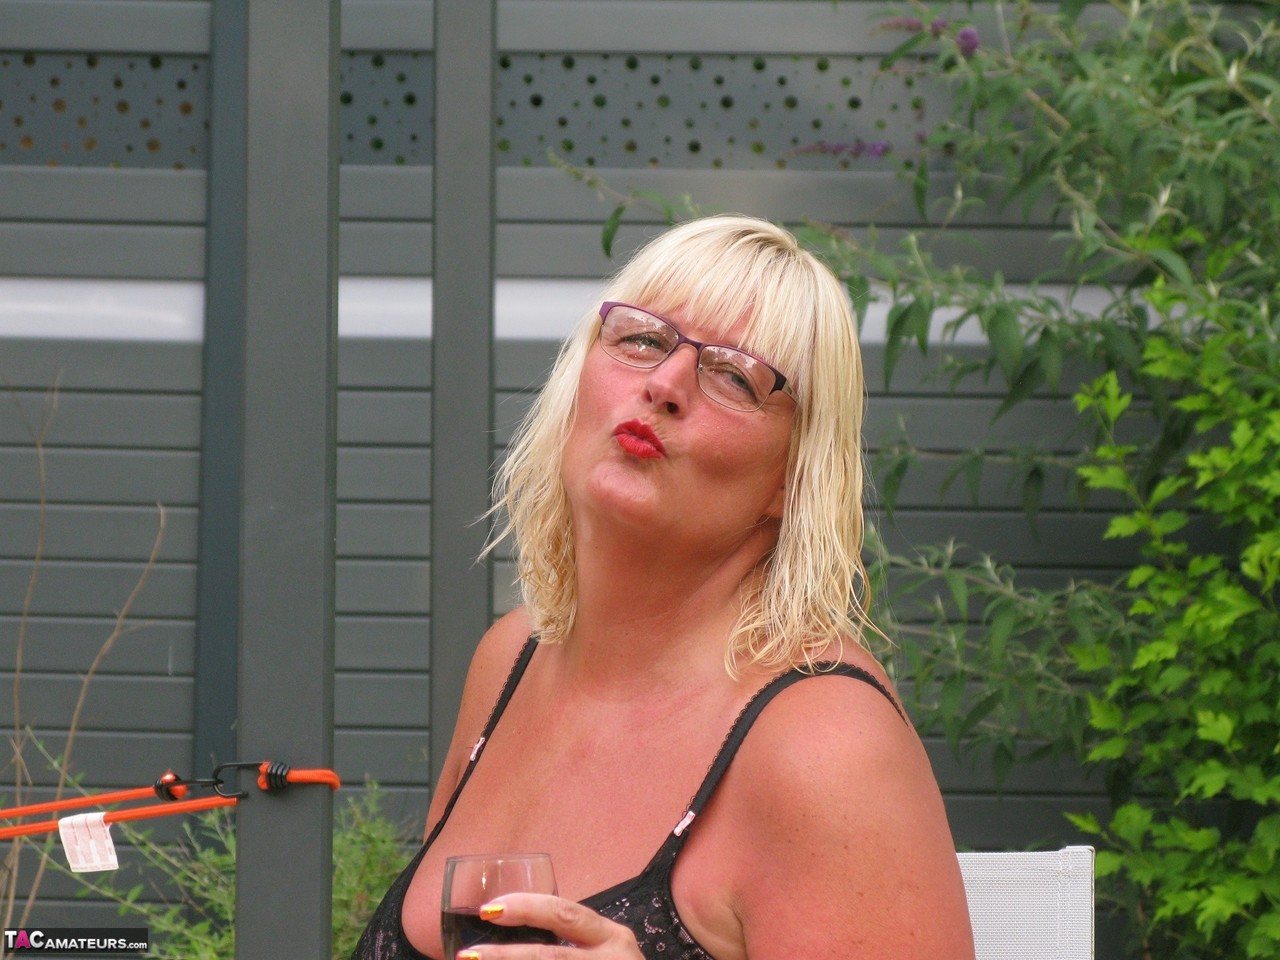 Older blonde BBW Chrissy Uk gives a BJ after going topless in a garden setting photo porno #428341424